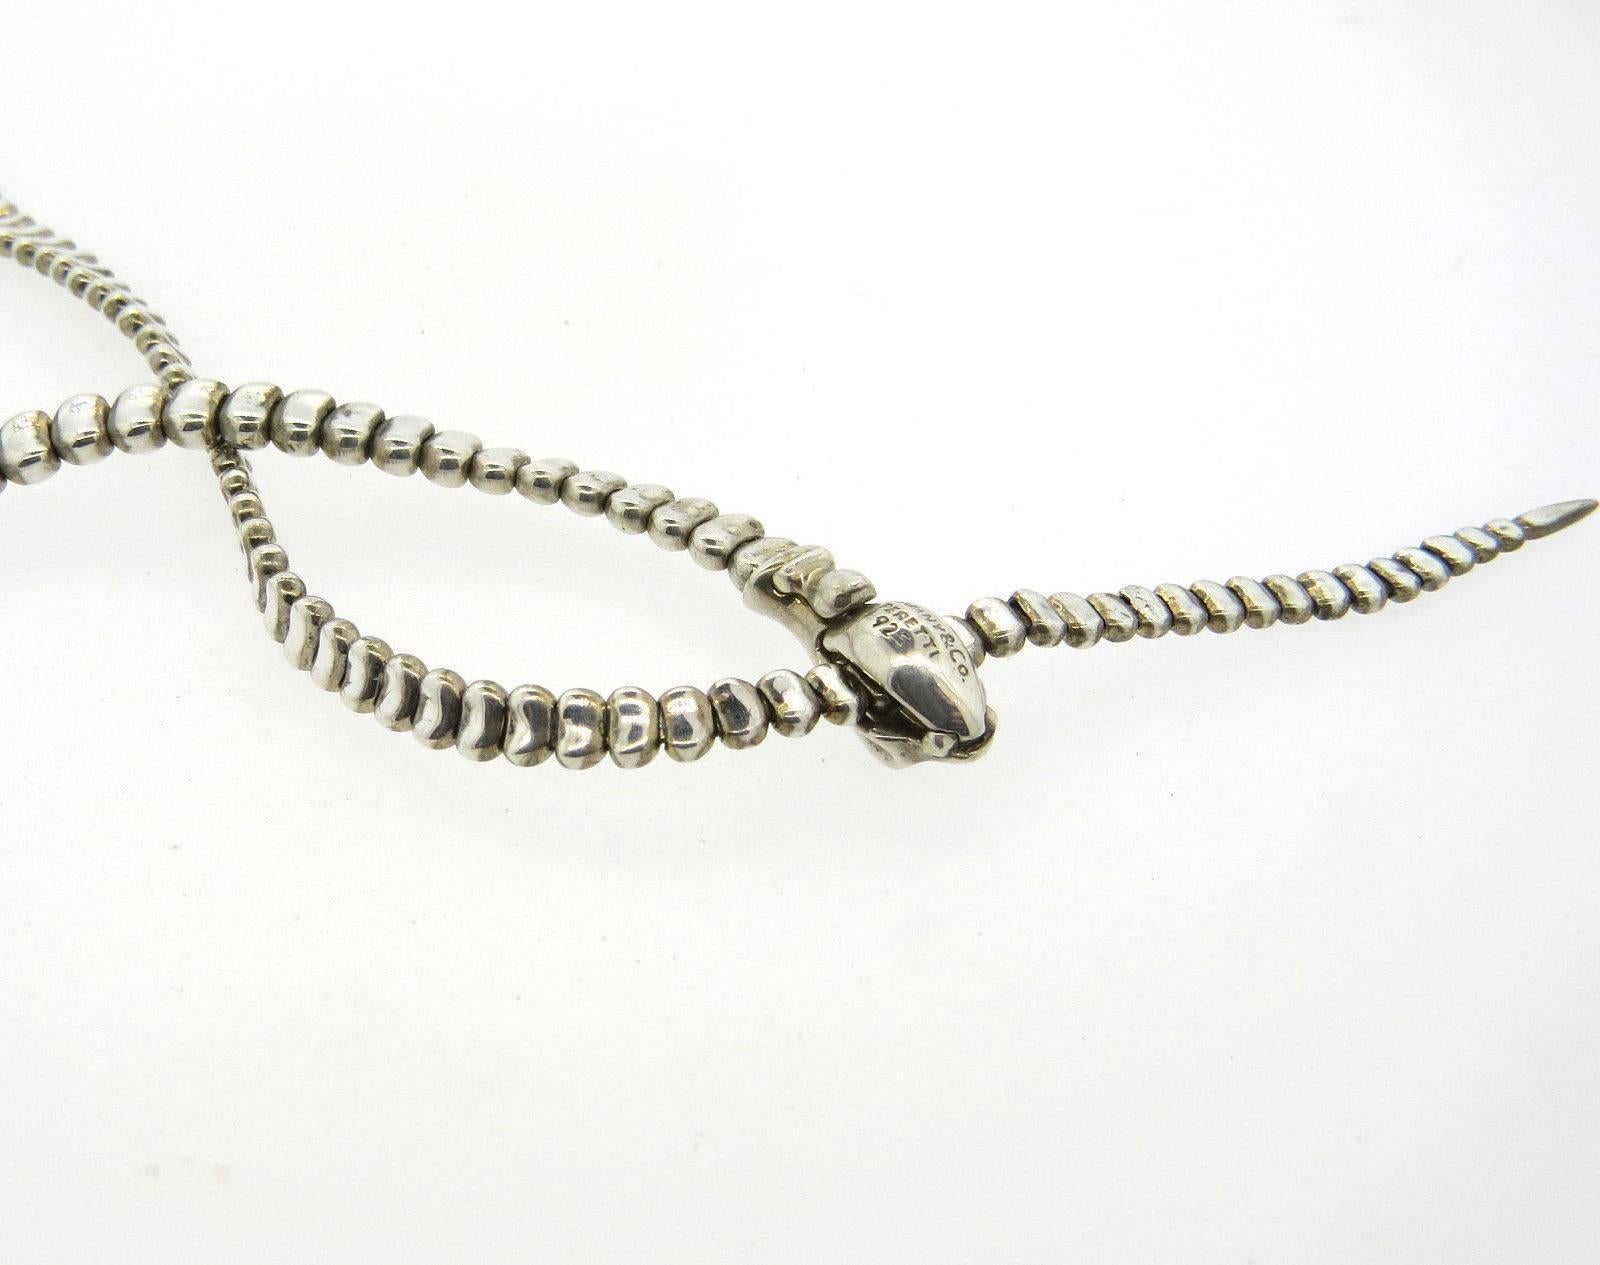 A sterling silver necklace in a snake motif.  Crafted by Elsa Peretti for Tiffany & Co., the length of the piece from end to end - 19 7/8